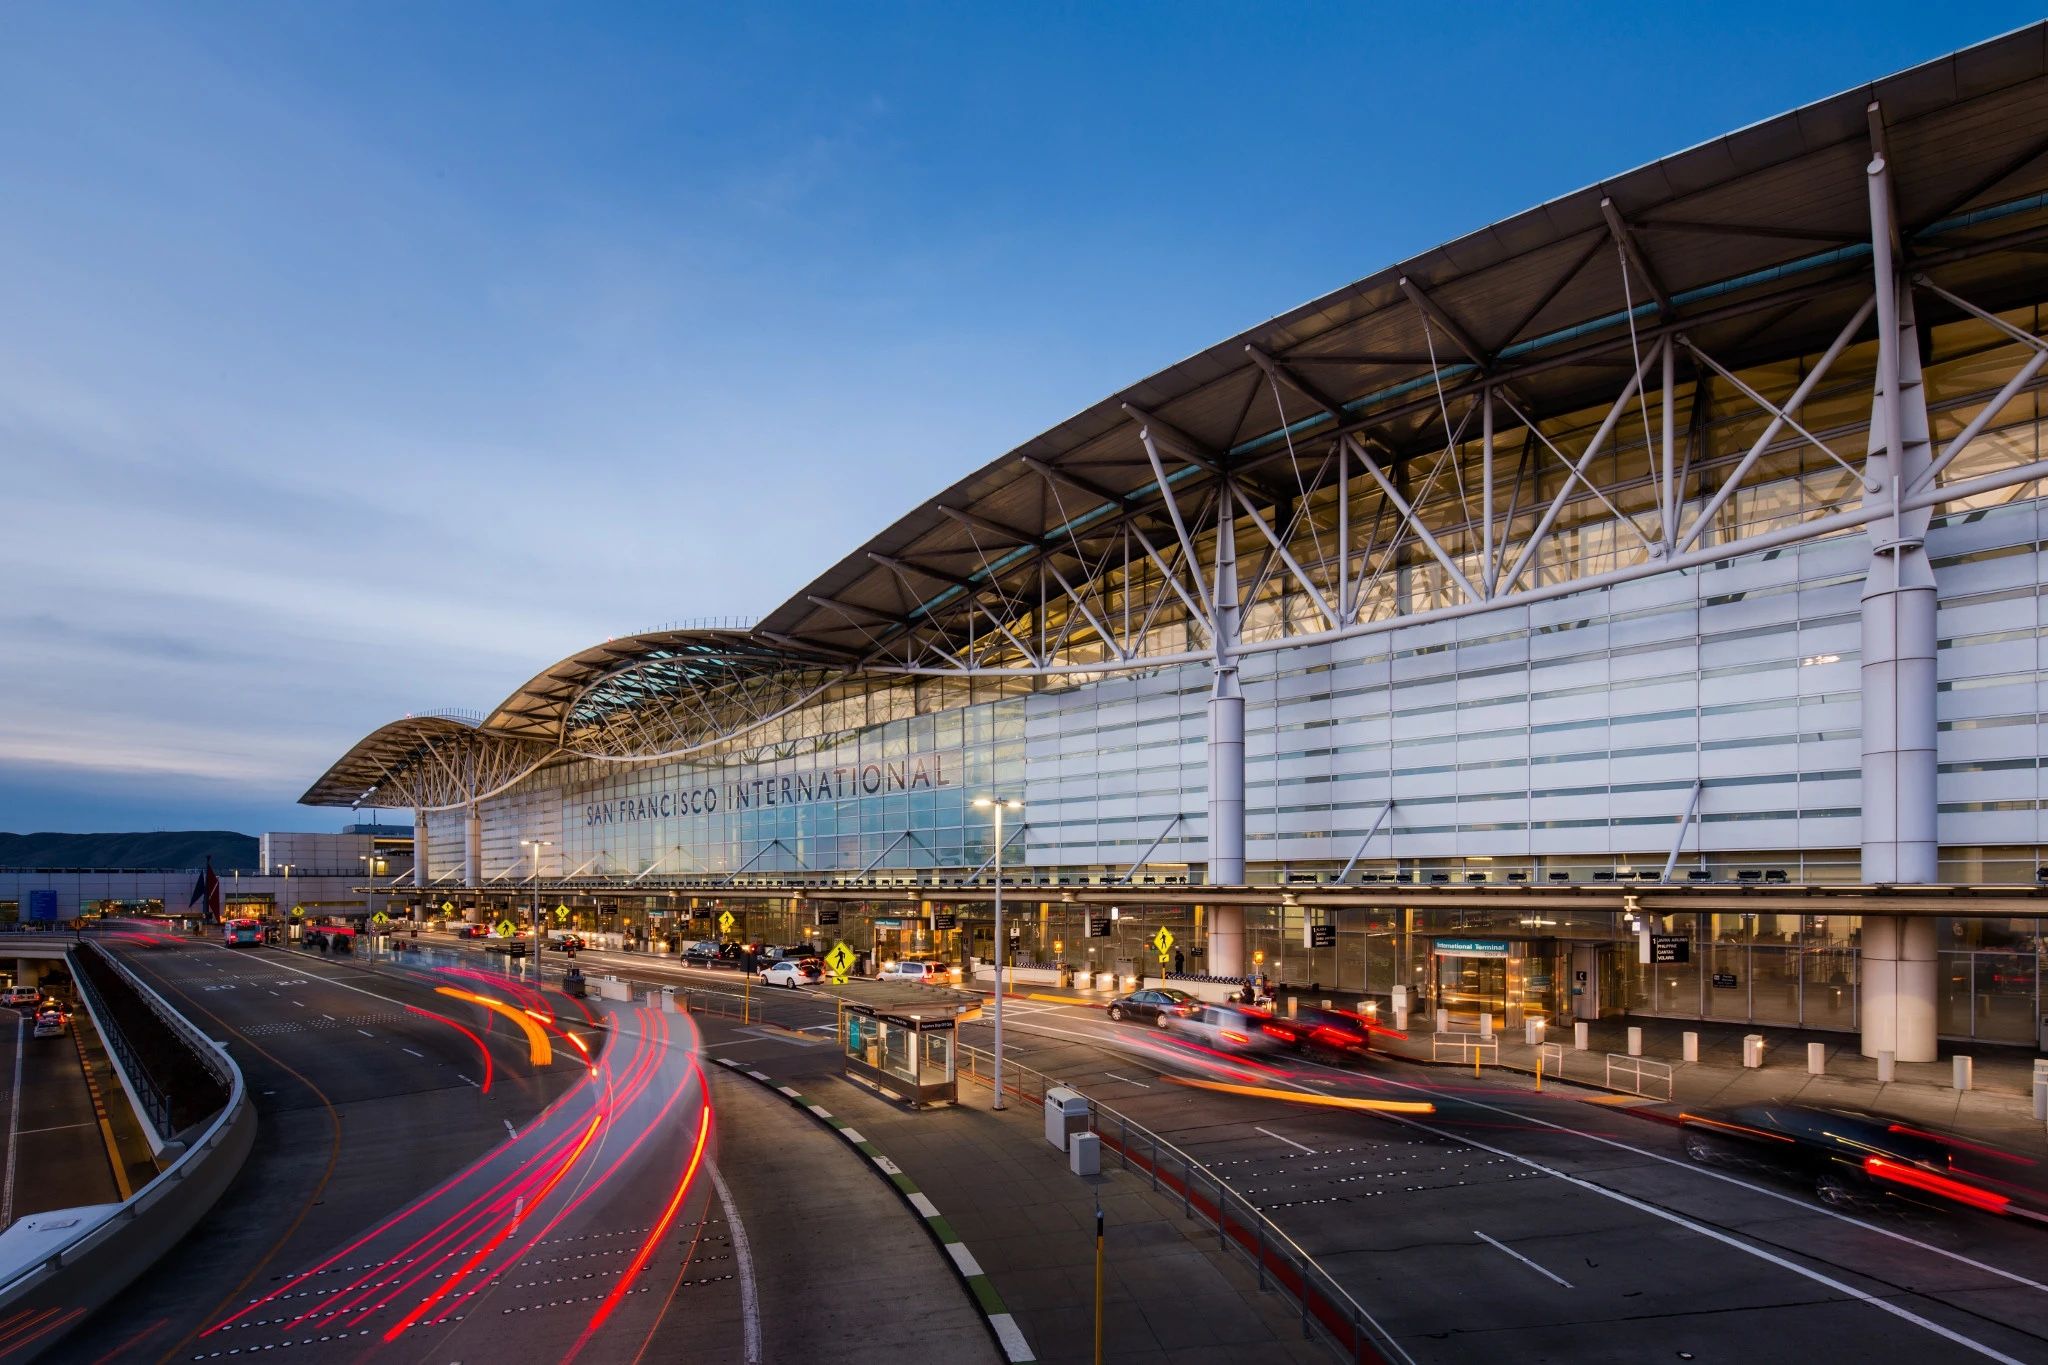 Street view of San Francisco International Airport passenger terminal at dusk with vehicles parked in front